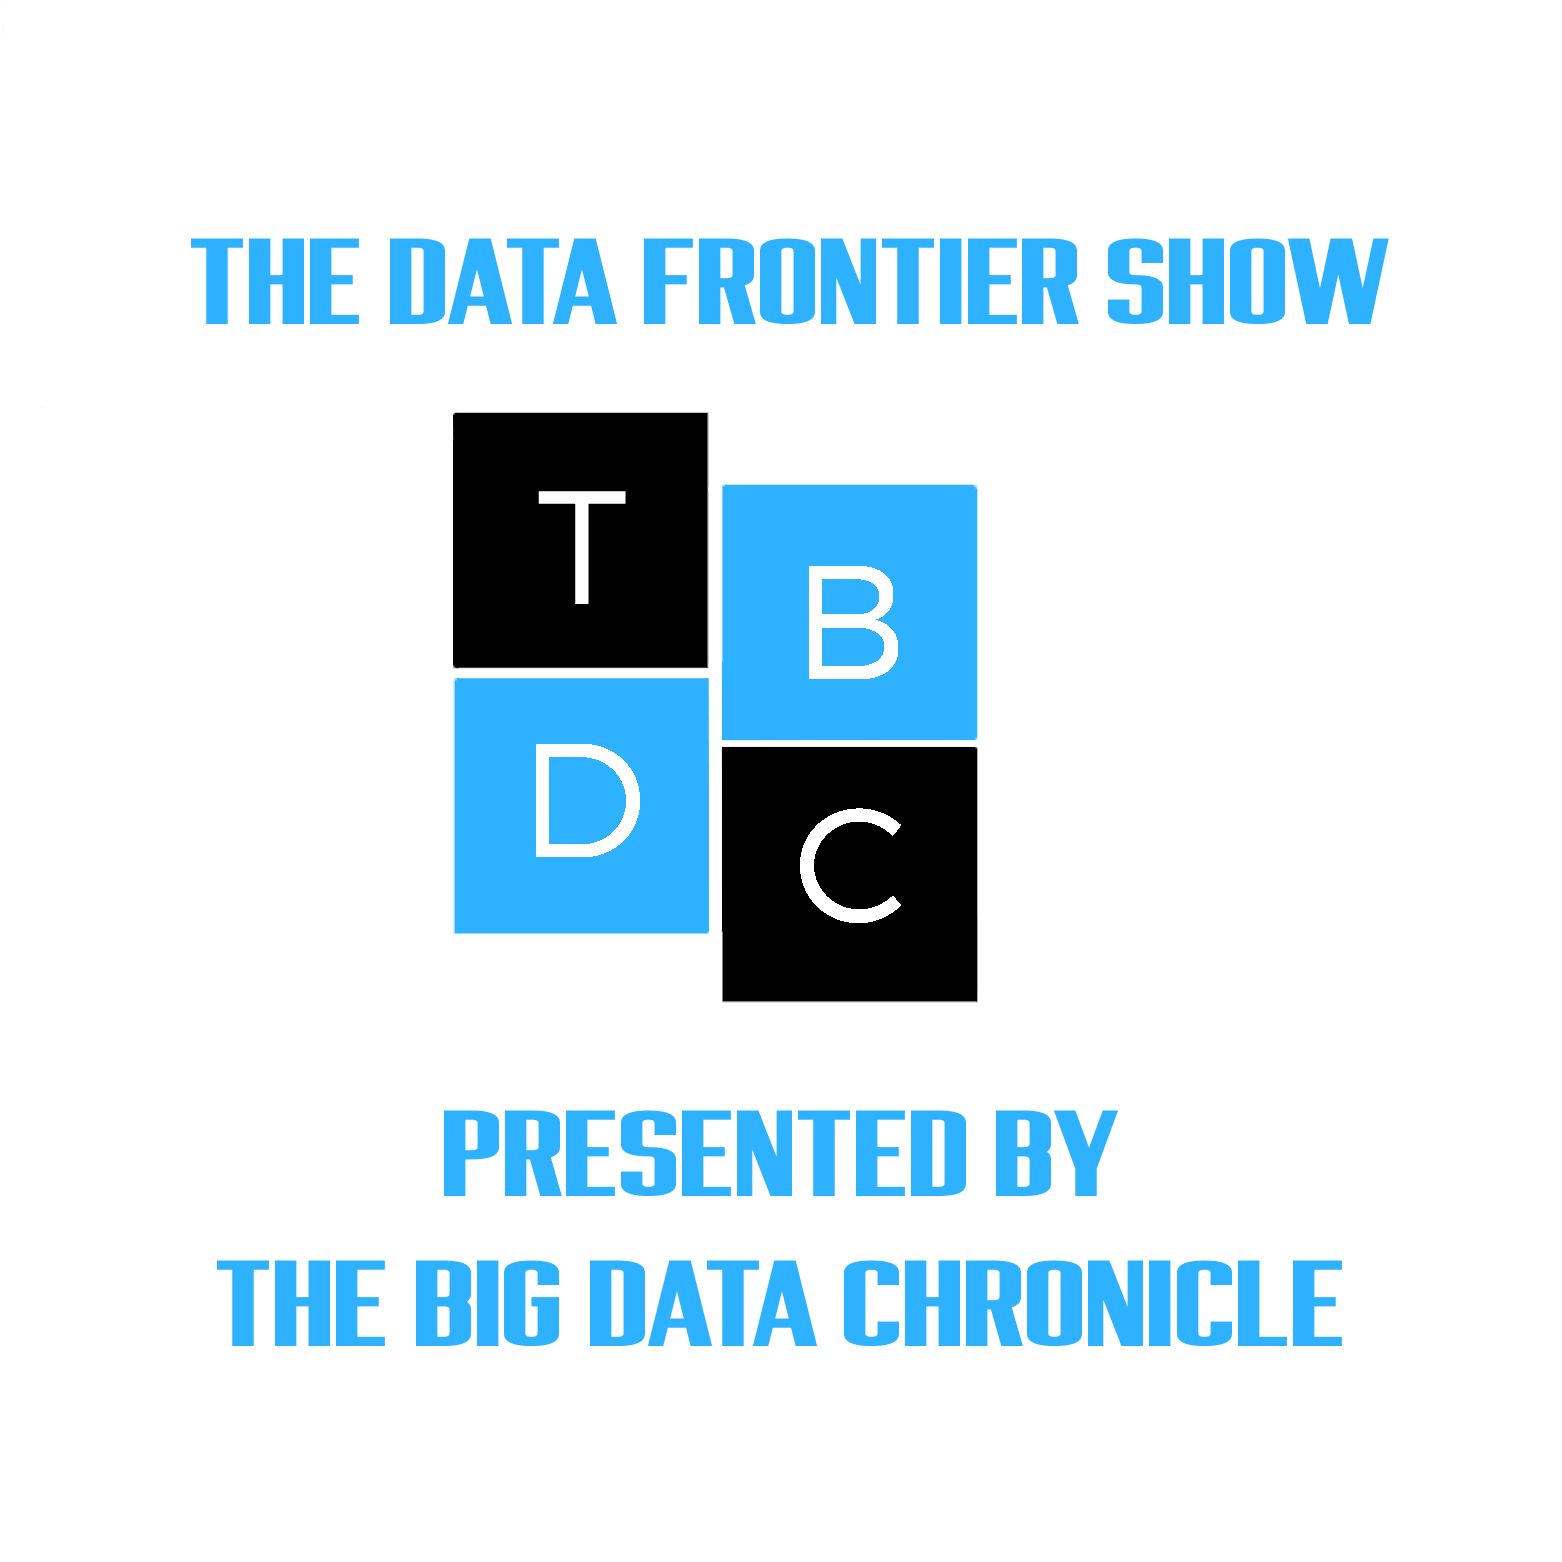 The Data Frontier Show